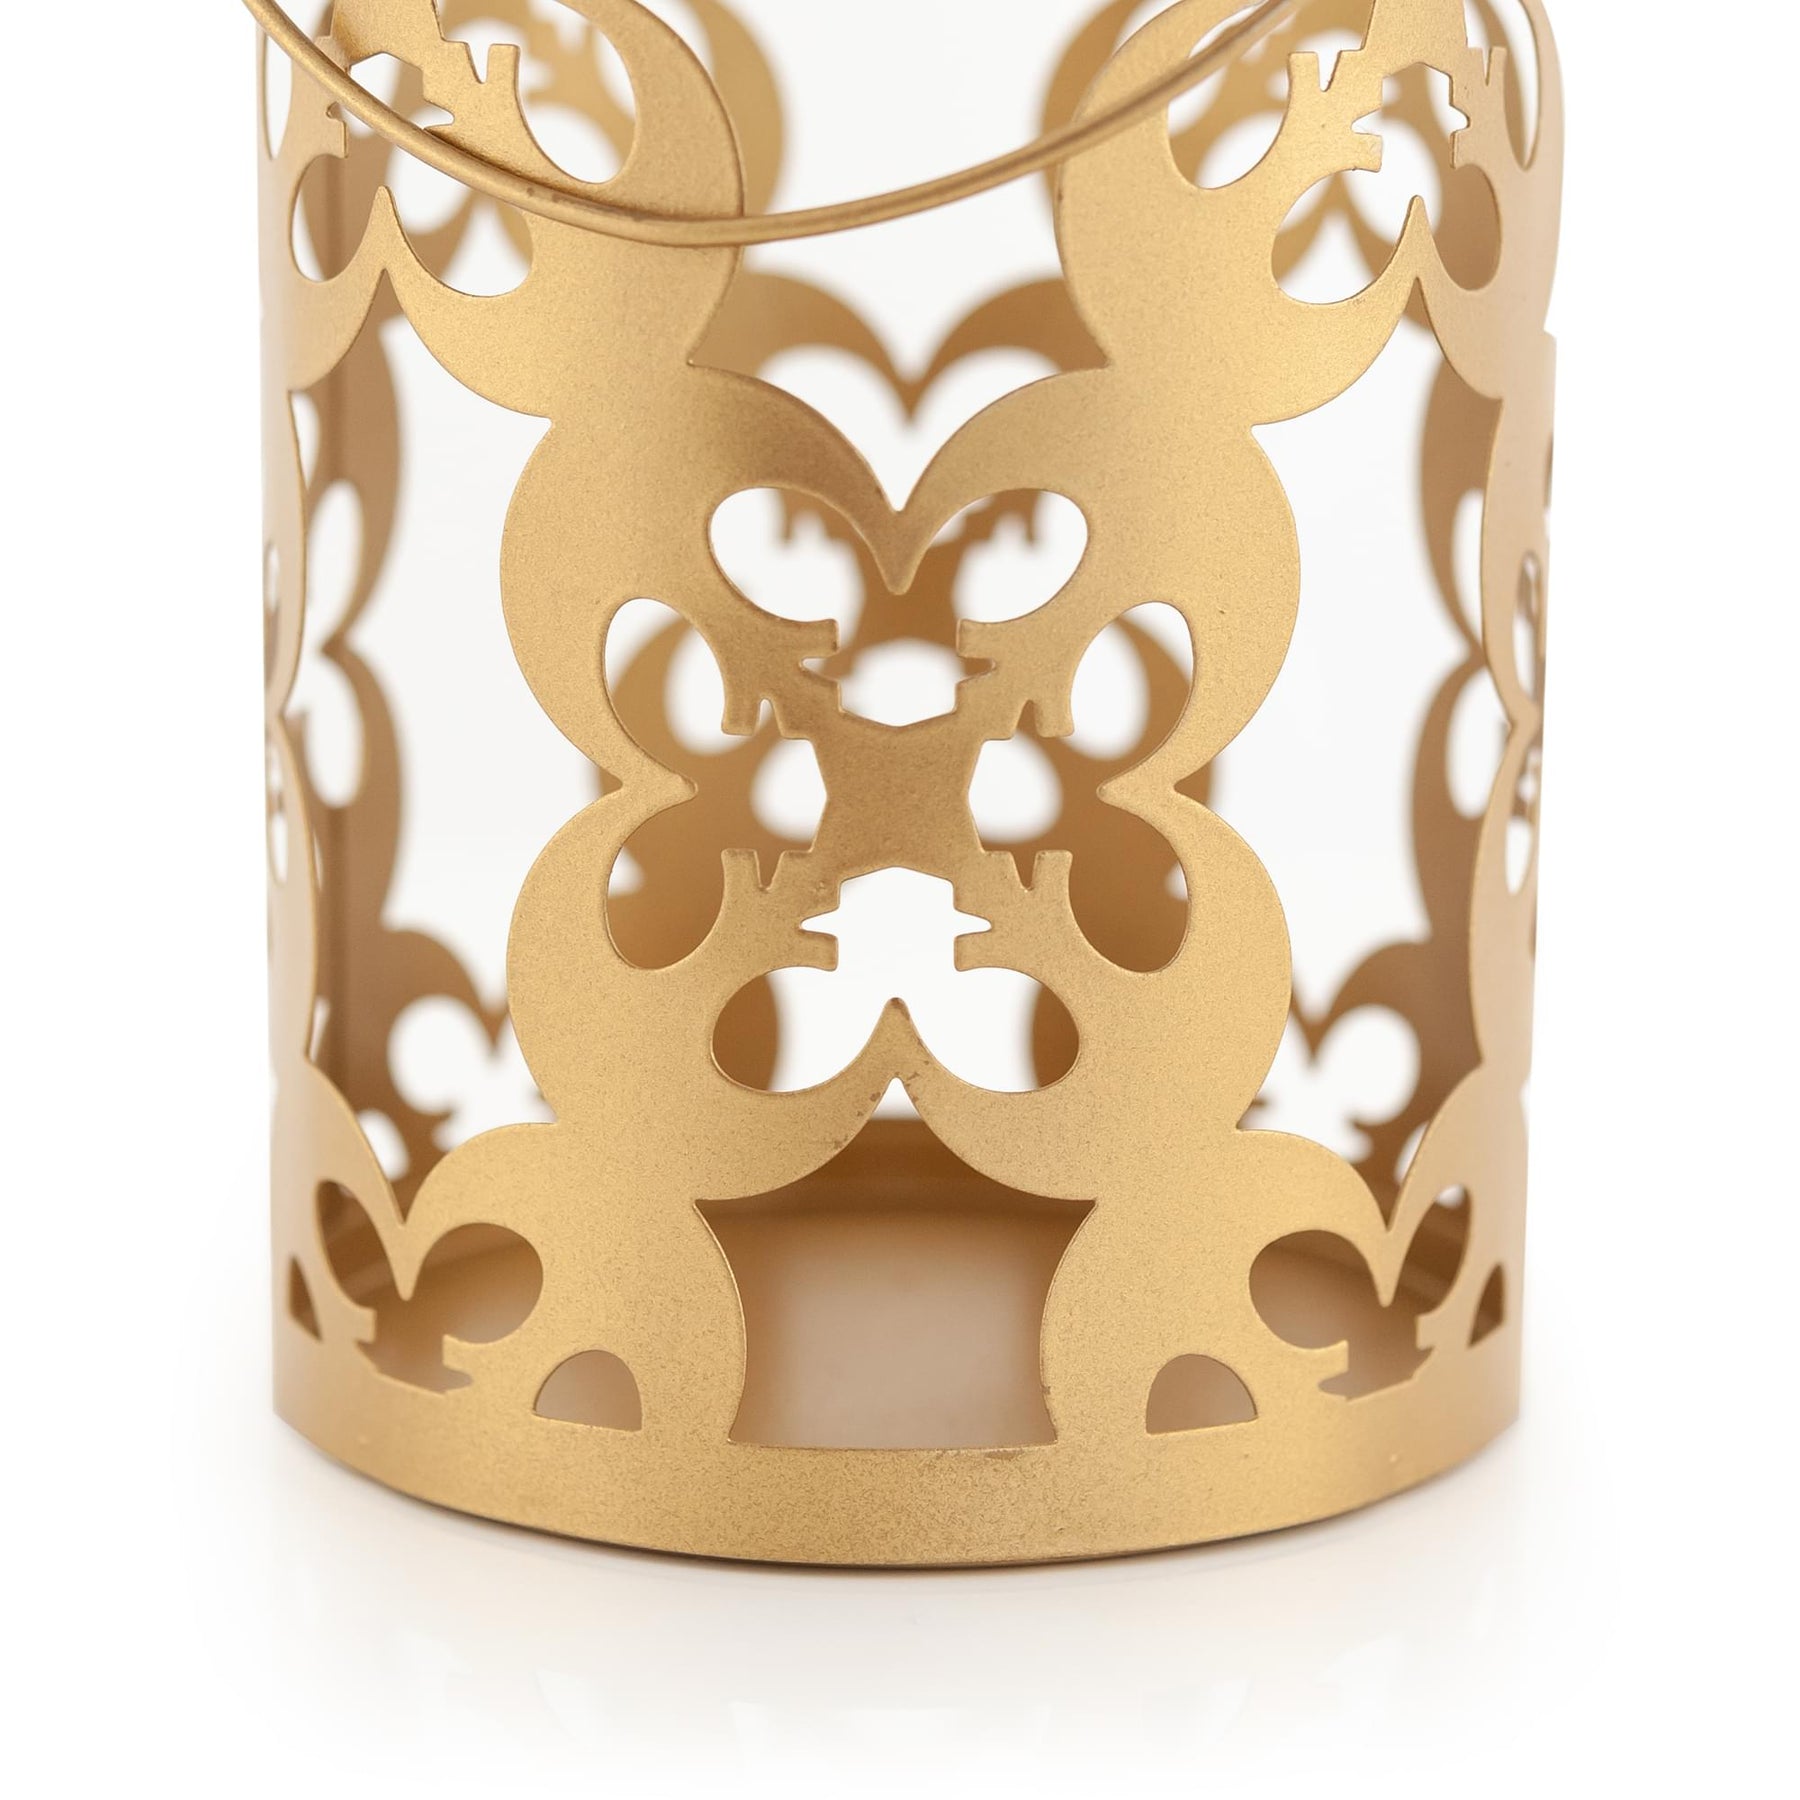 Star Wars Gold Stamped Lantern | Rebel Symbol Clusters | 11.5 Inches Tall